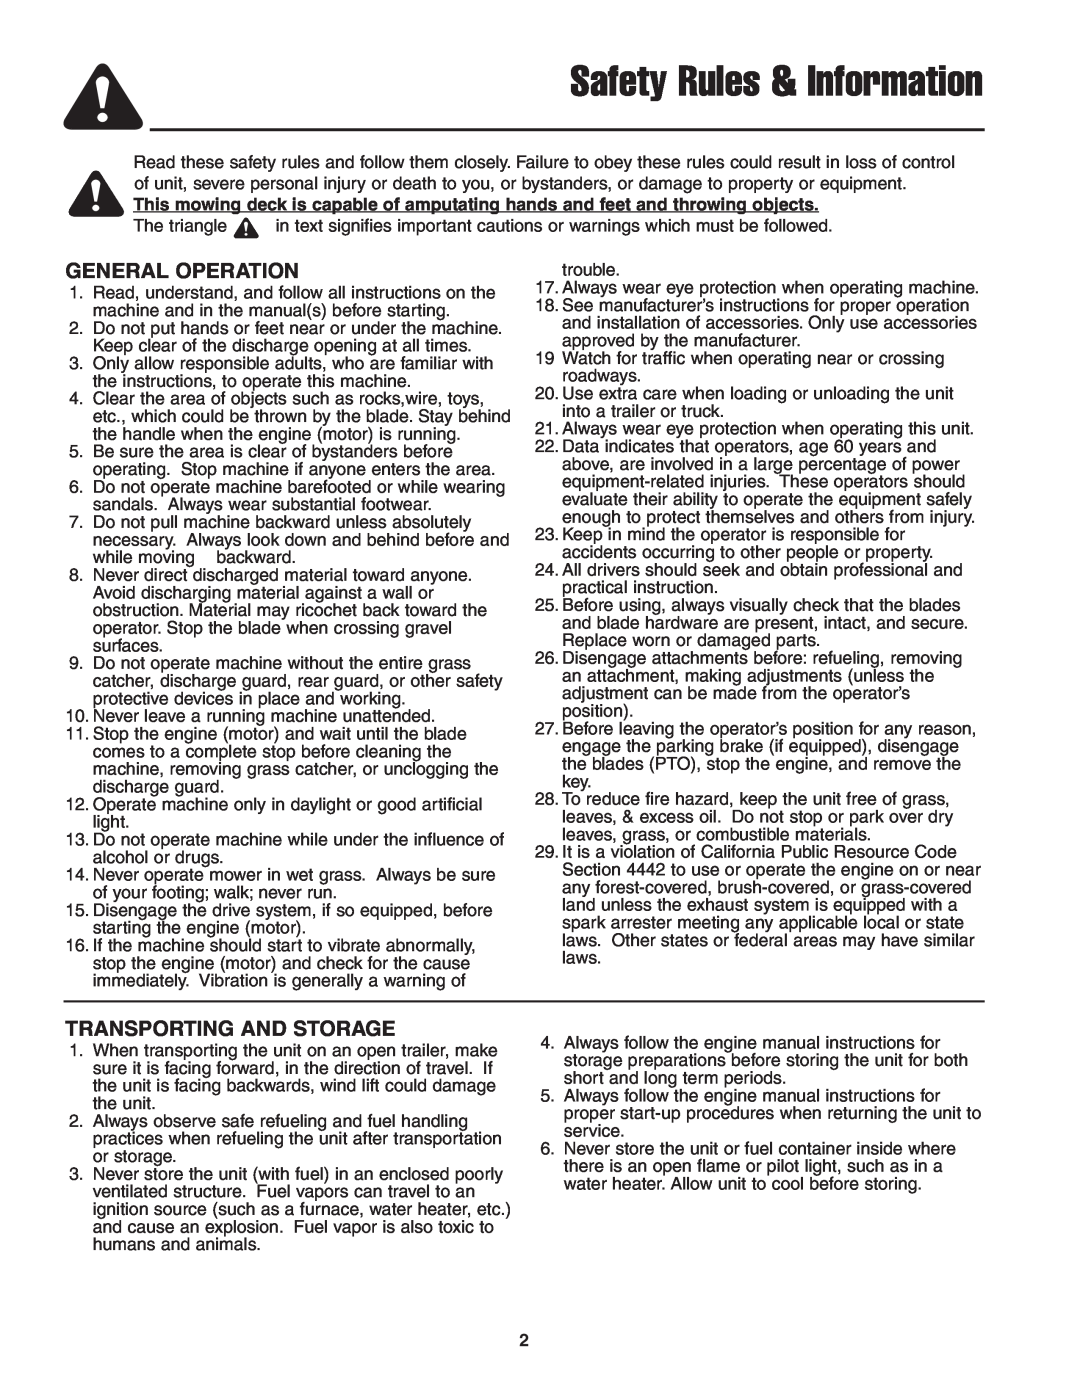 Snapper 13HP manual Safety Rules & Information, General Operation, Transporting And Storage 